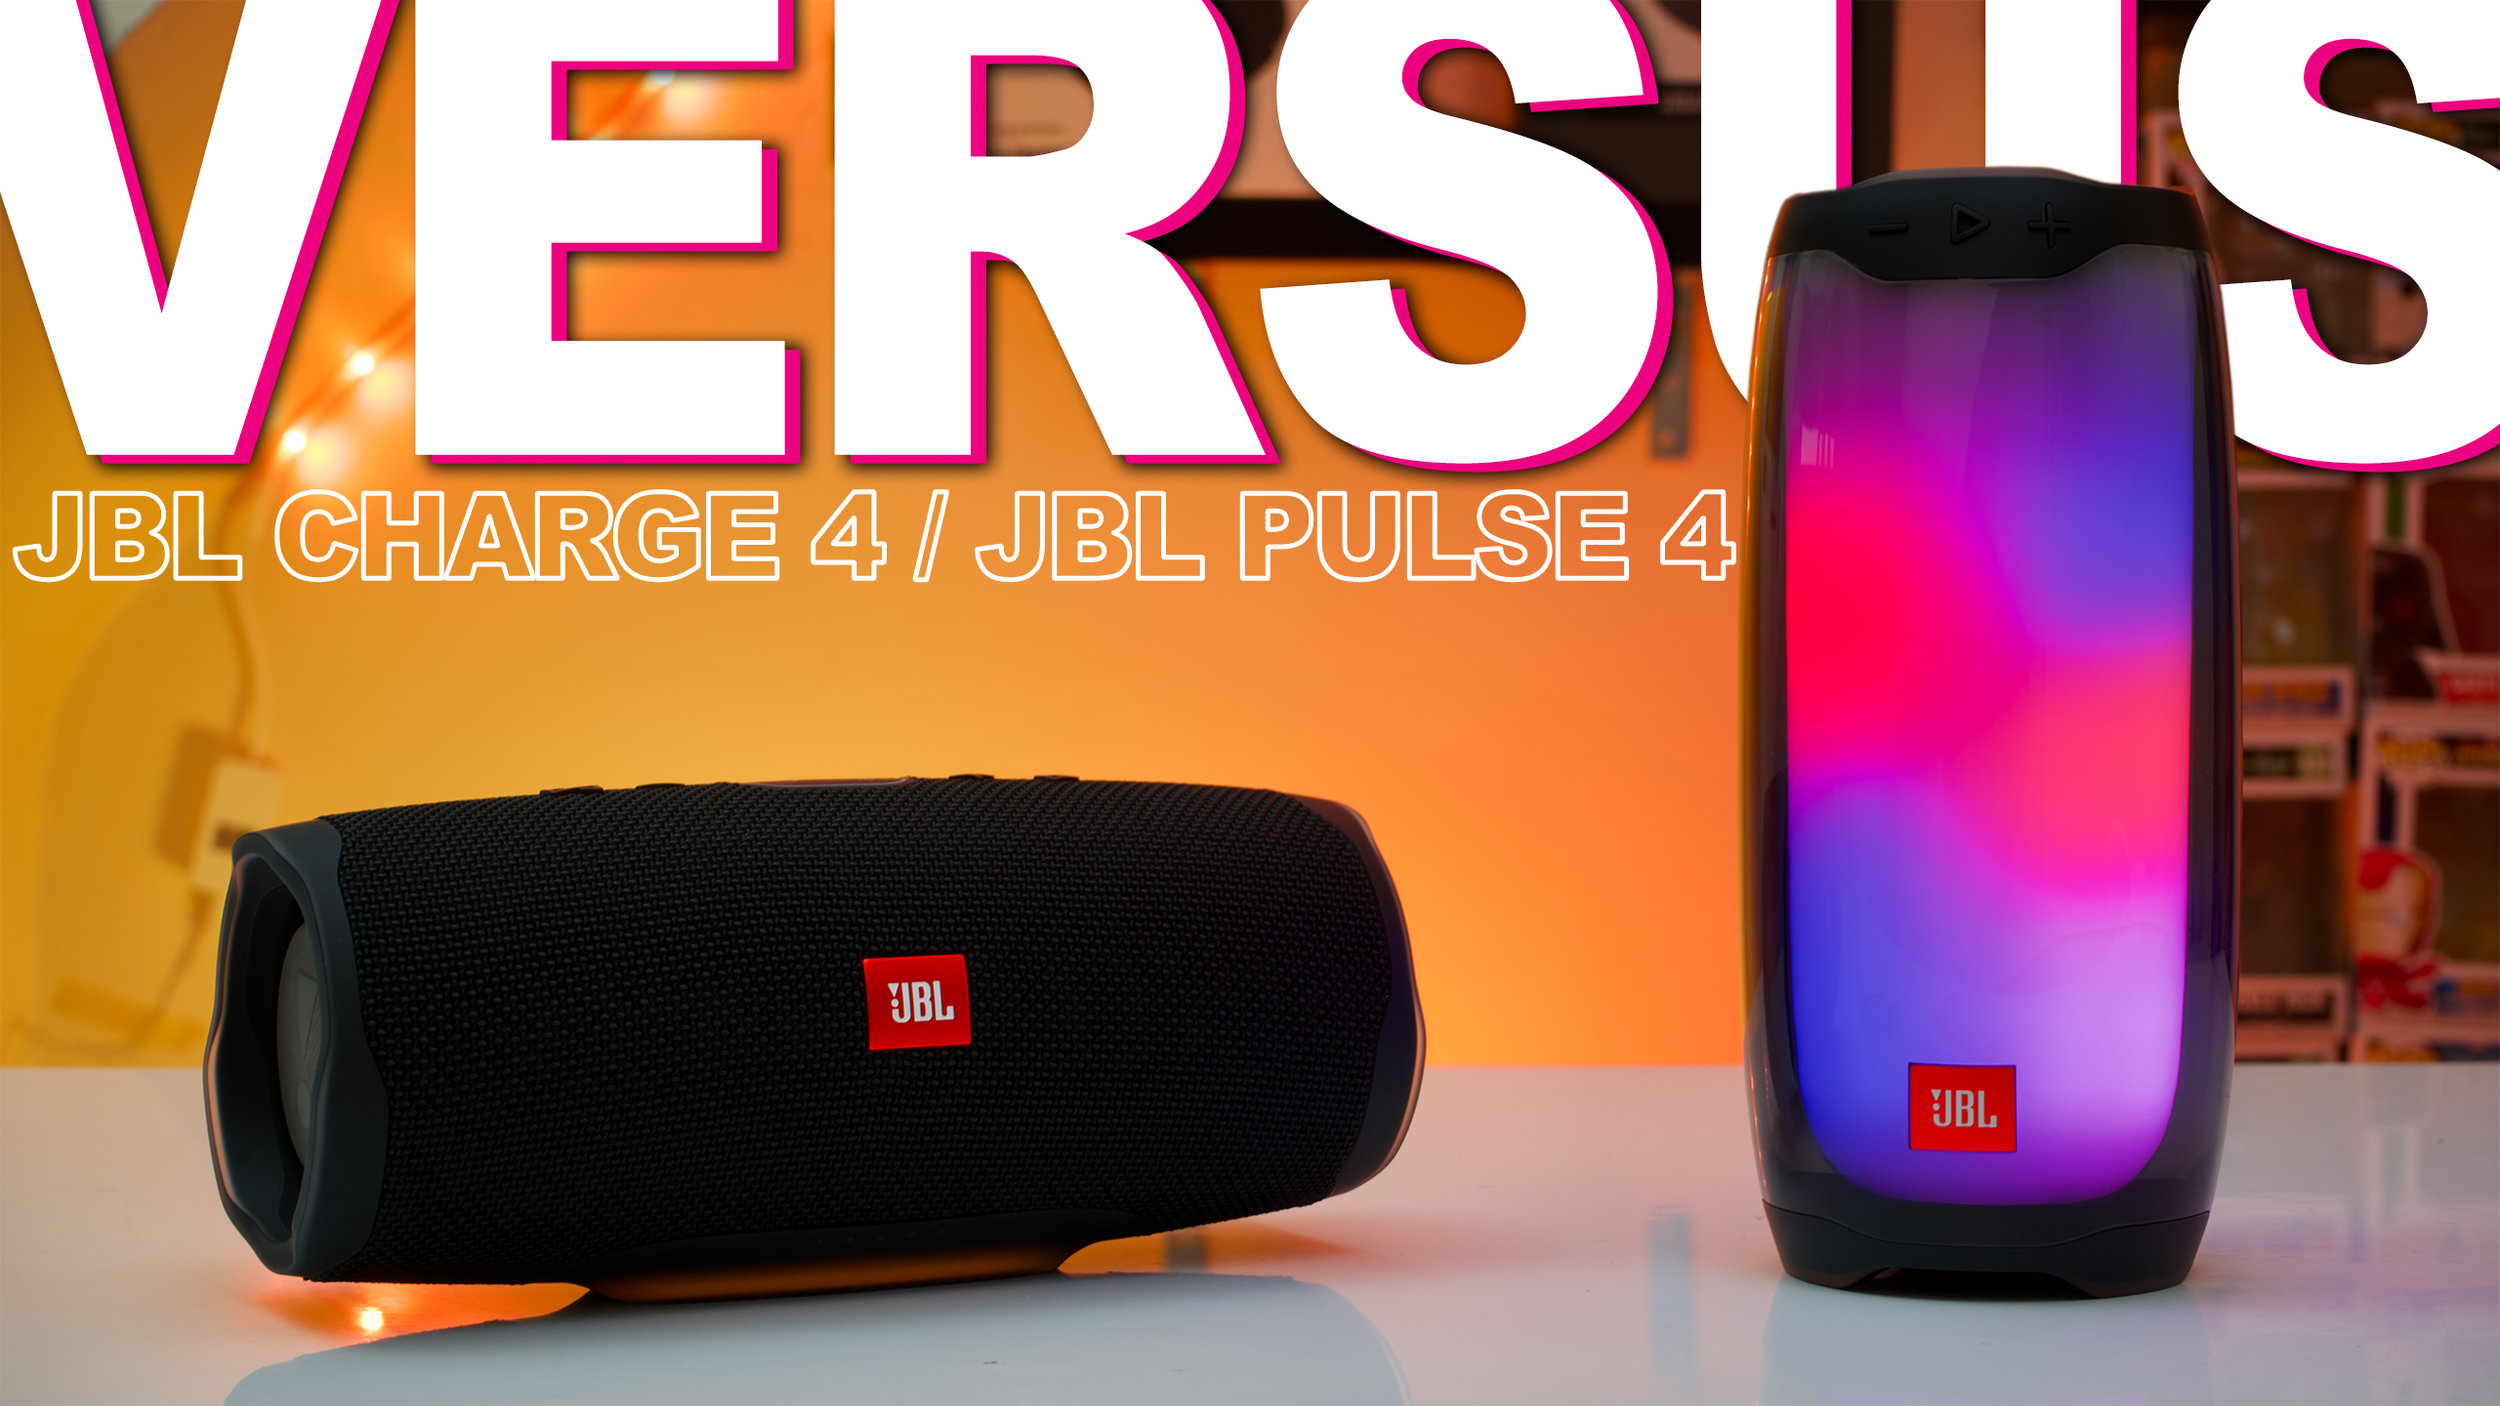 JBL Pulse 4 Vs JBL Charge 4 - They're 